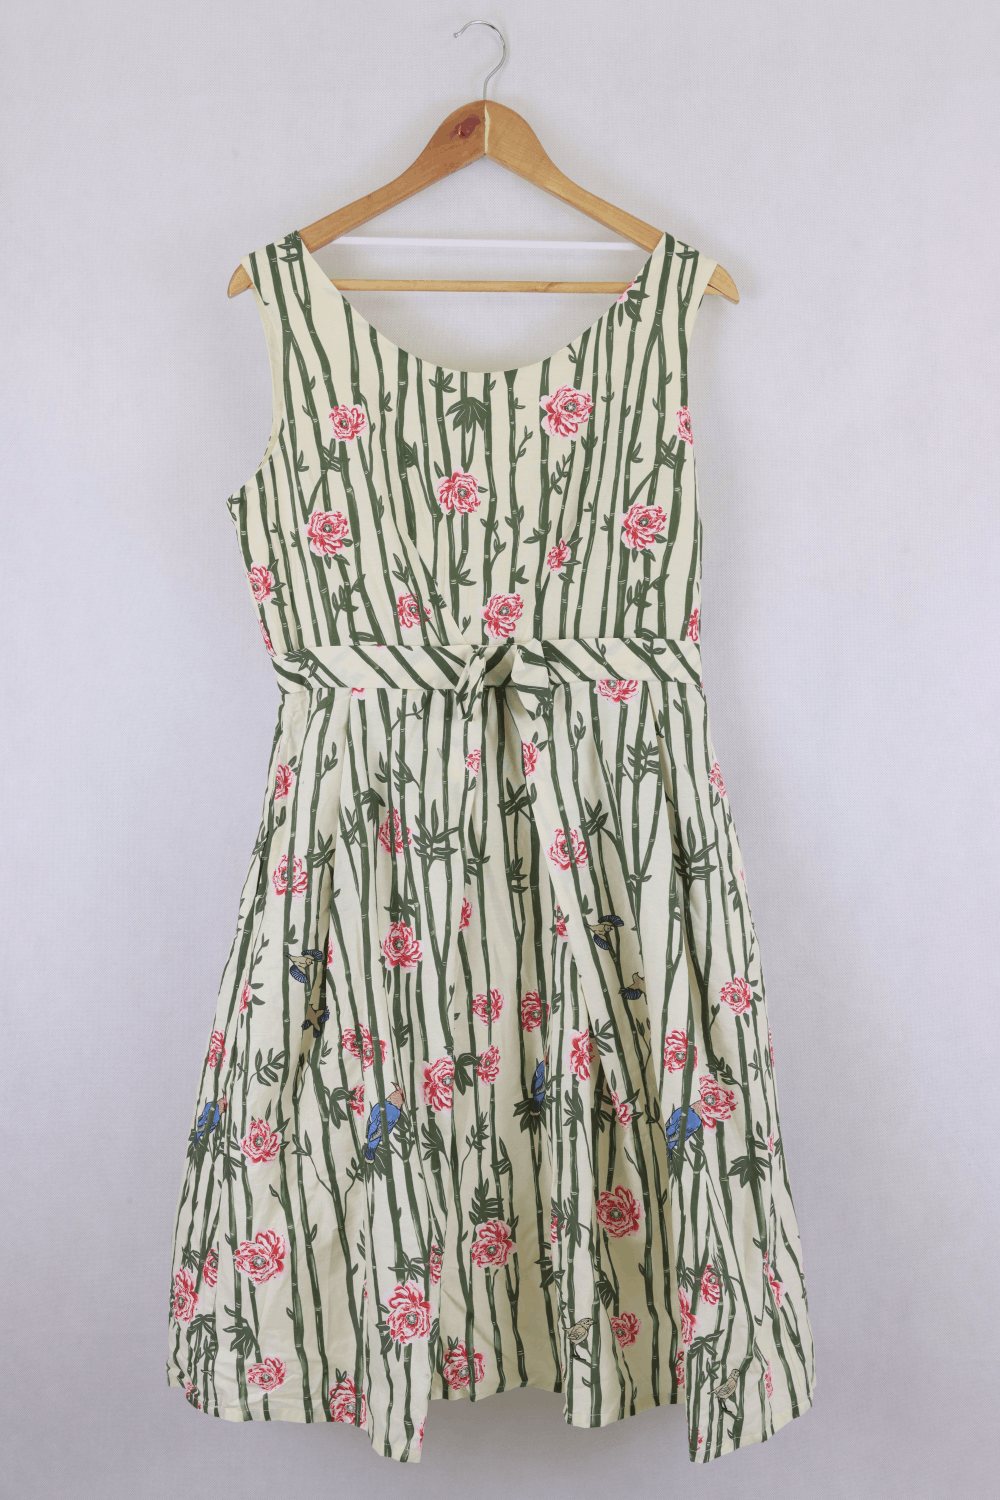 Revival Floral  Yellow And Green Dress 12 BNWT